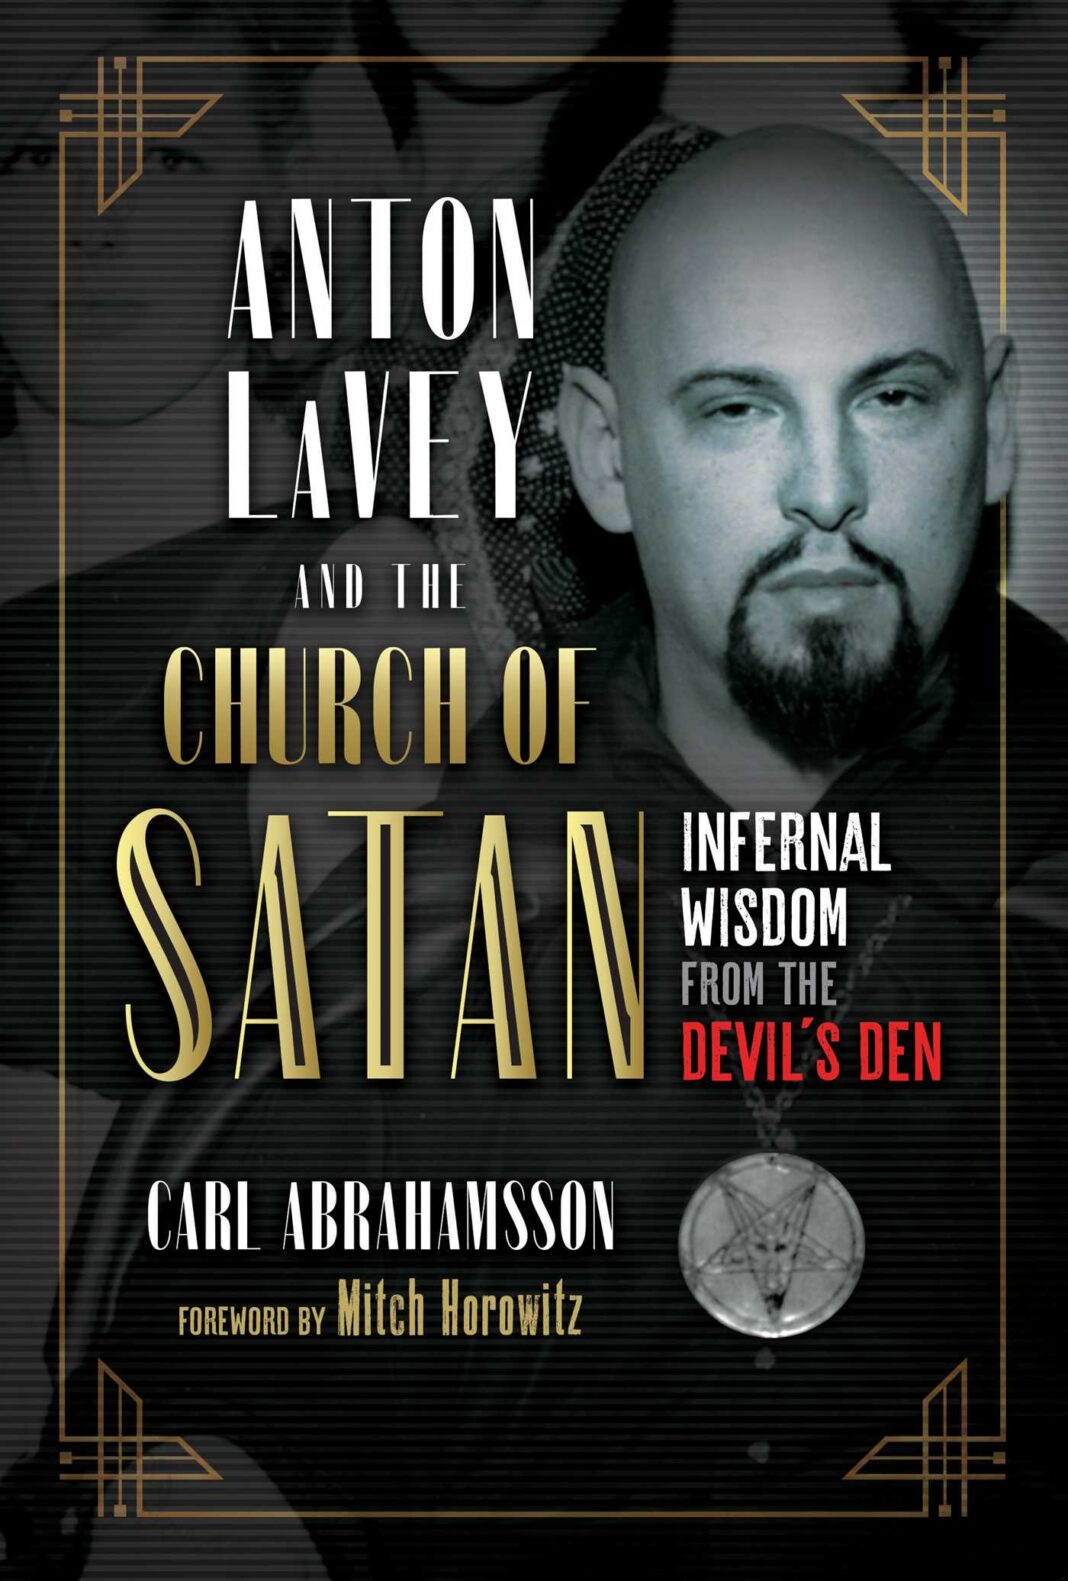 anton-lavey-last-words-an-in-depth-exploration this blog is very interesting and edifying about anton lavey last words.